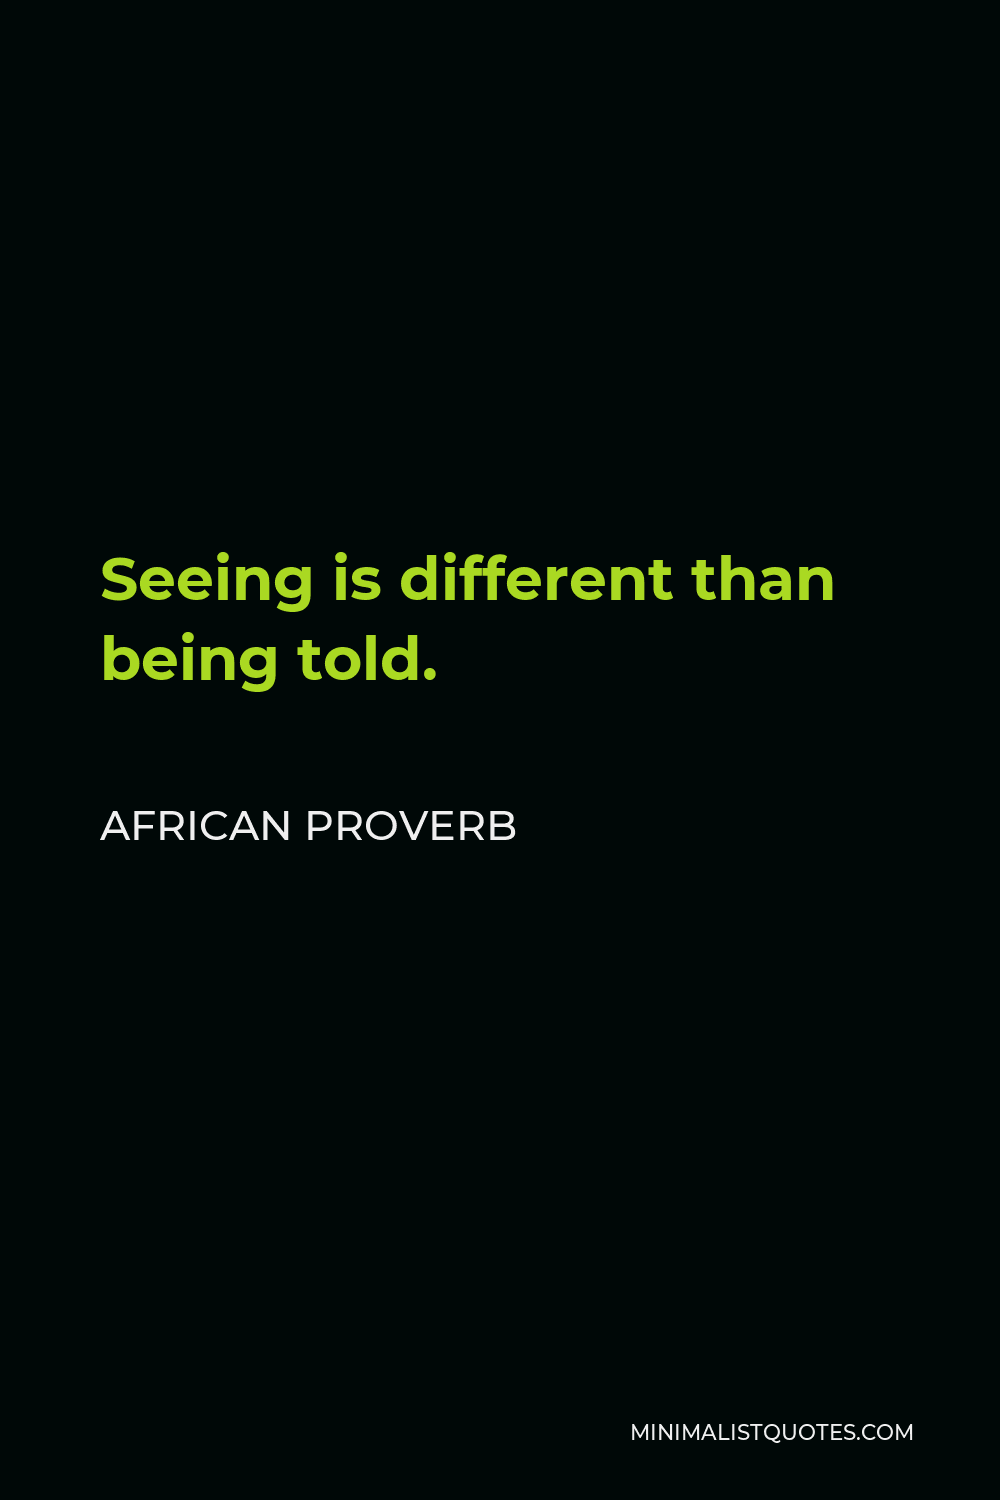 African Proverb Quote - Seeing is different than being told.